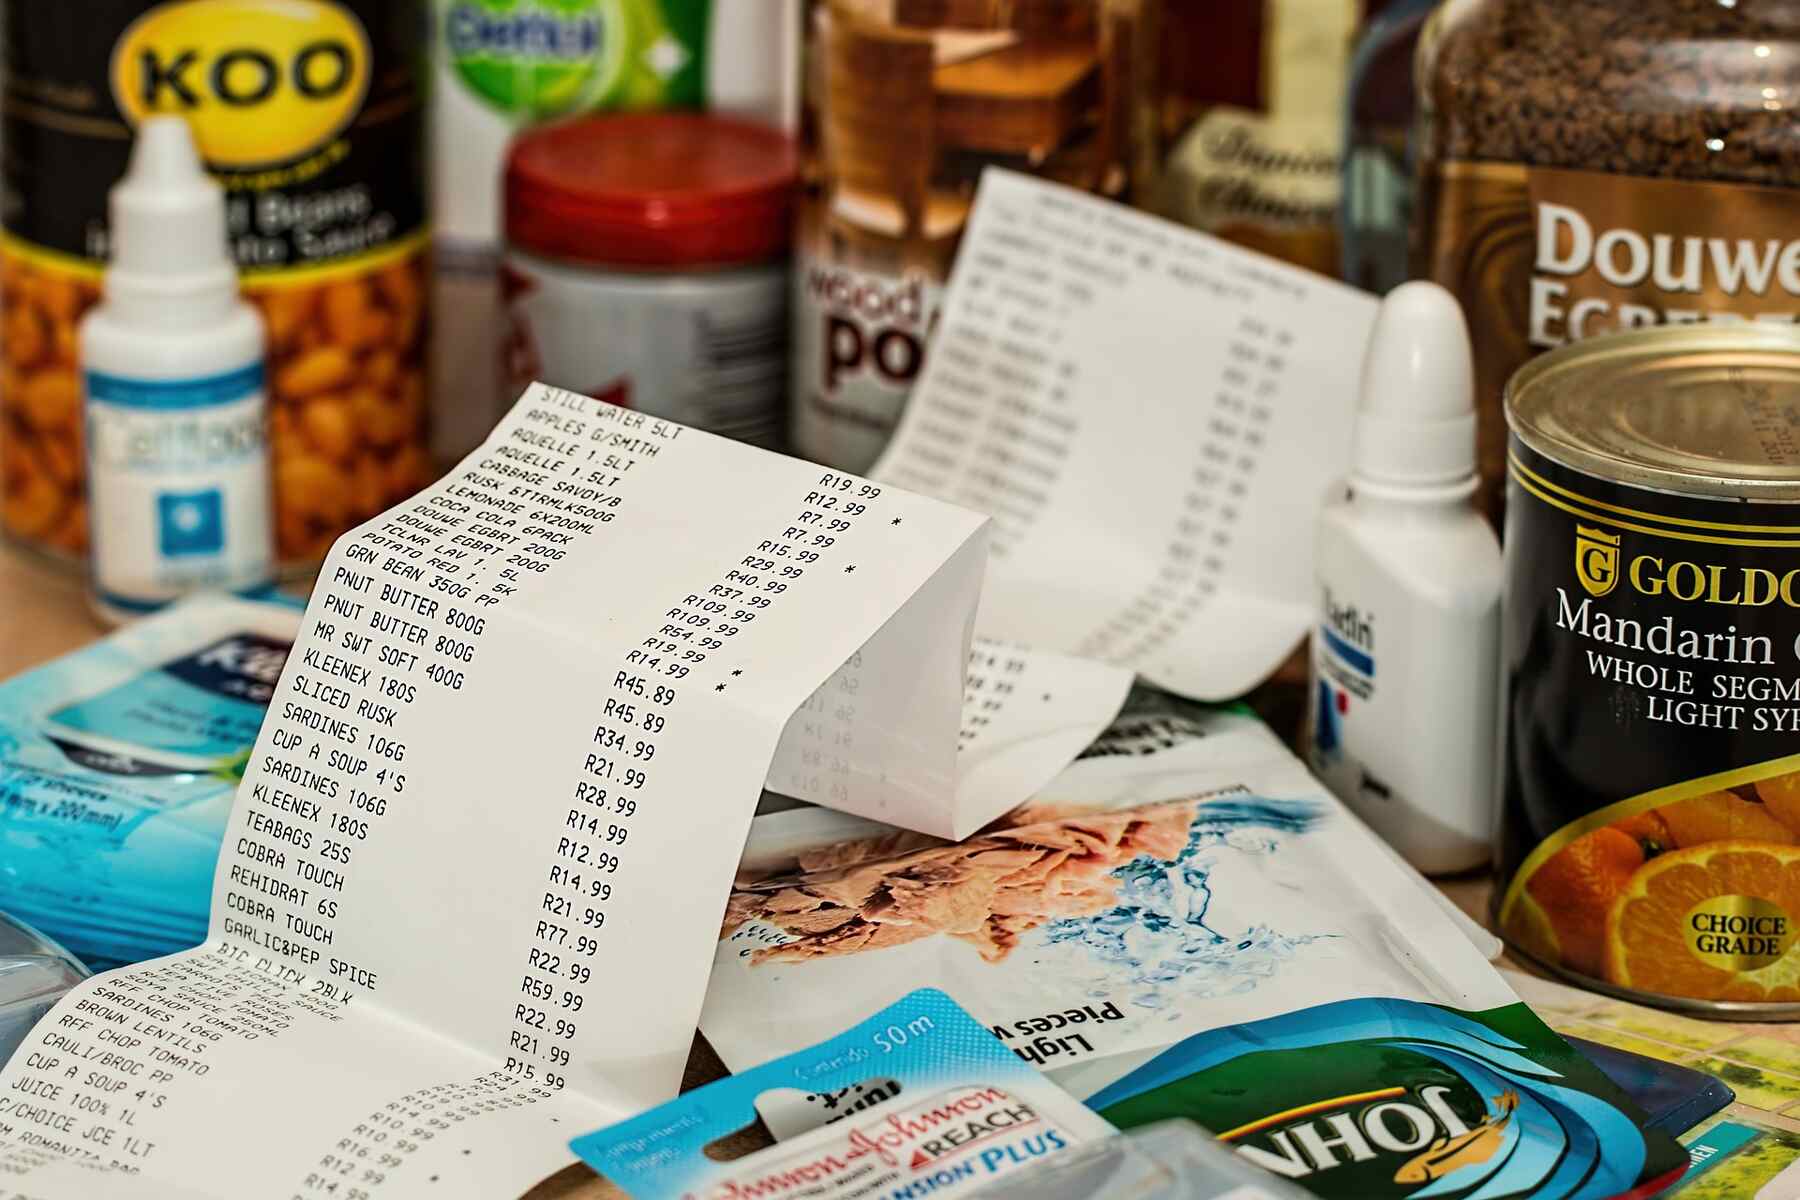 Long grocery receipt with products purchased visible on the table